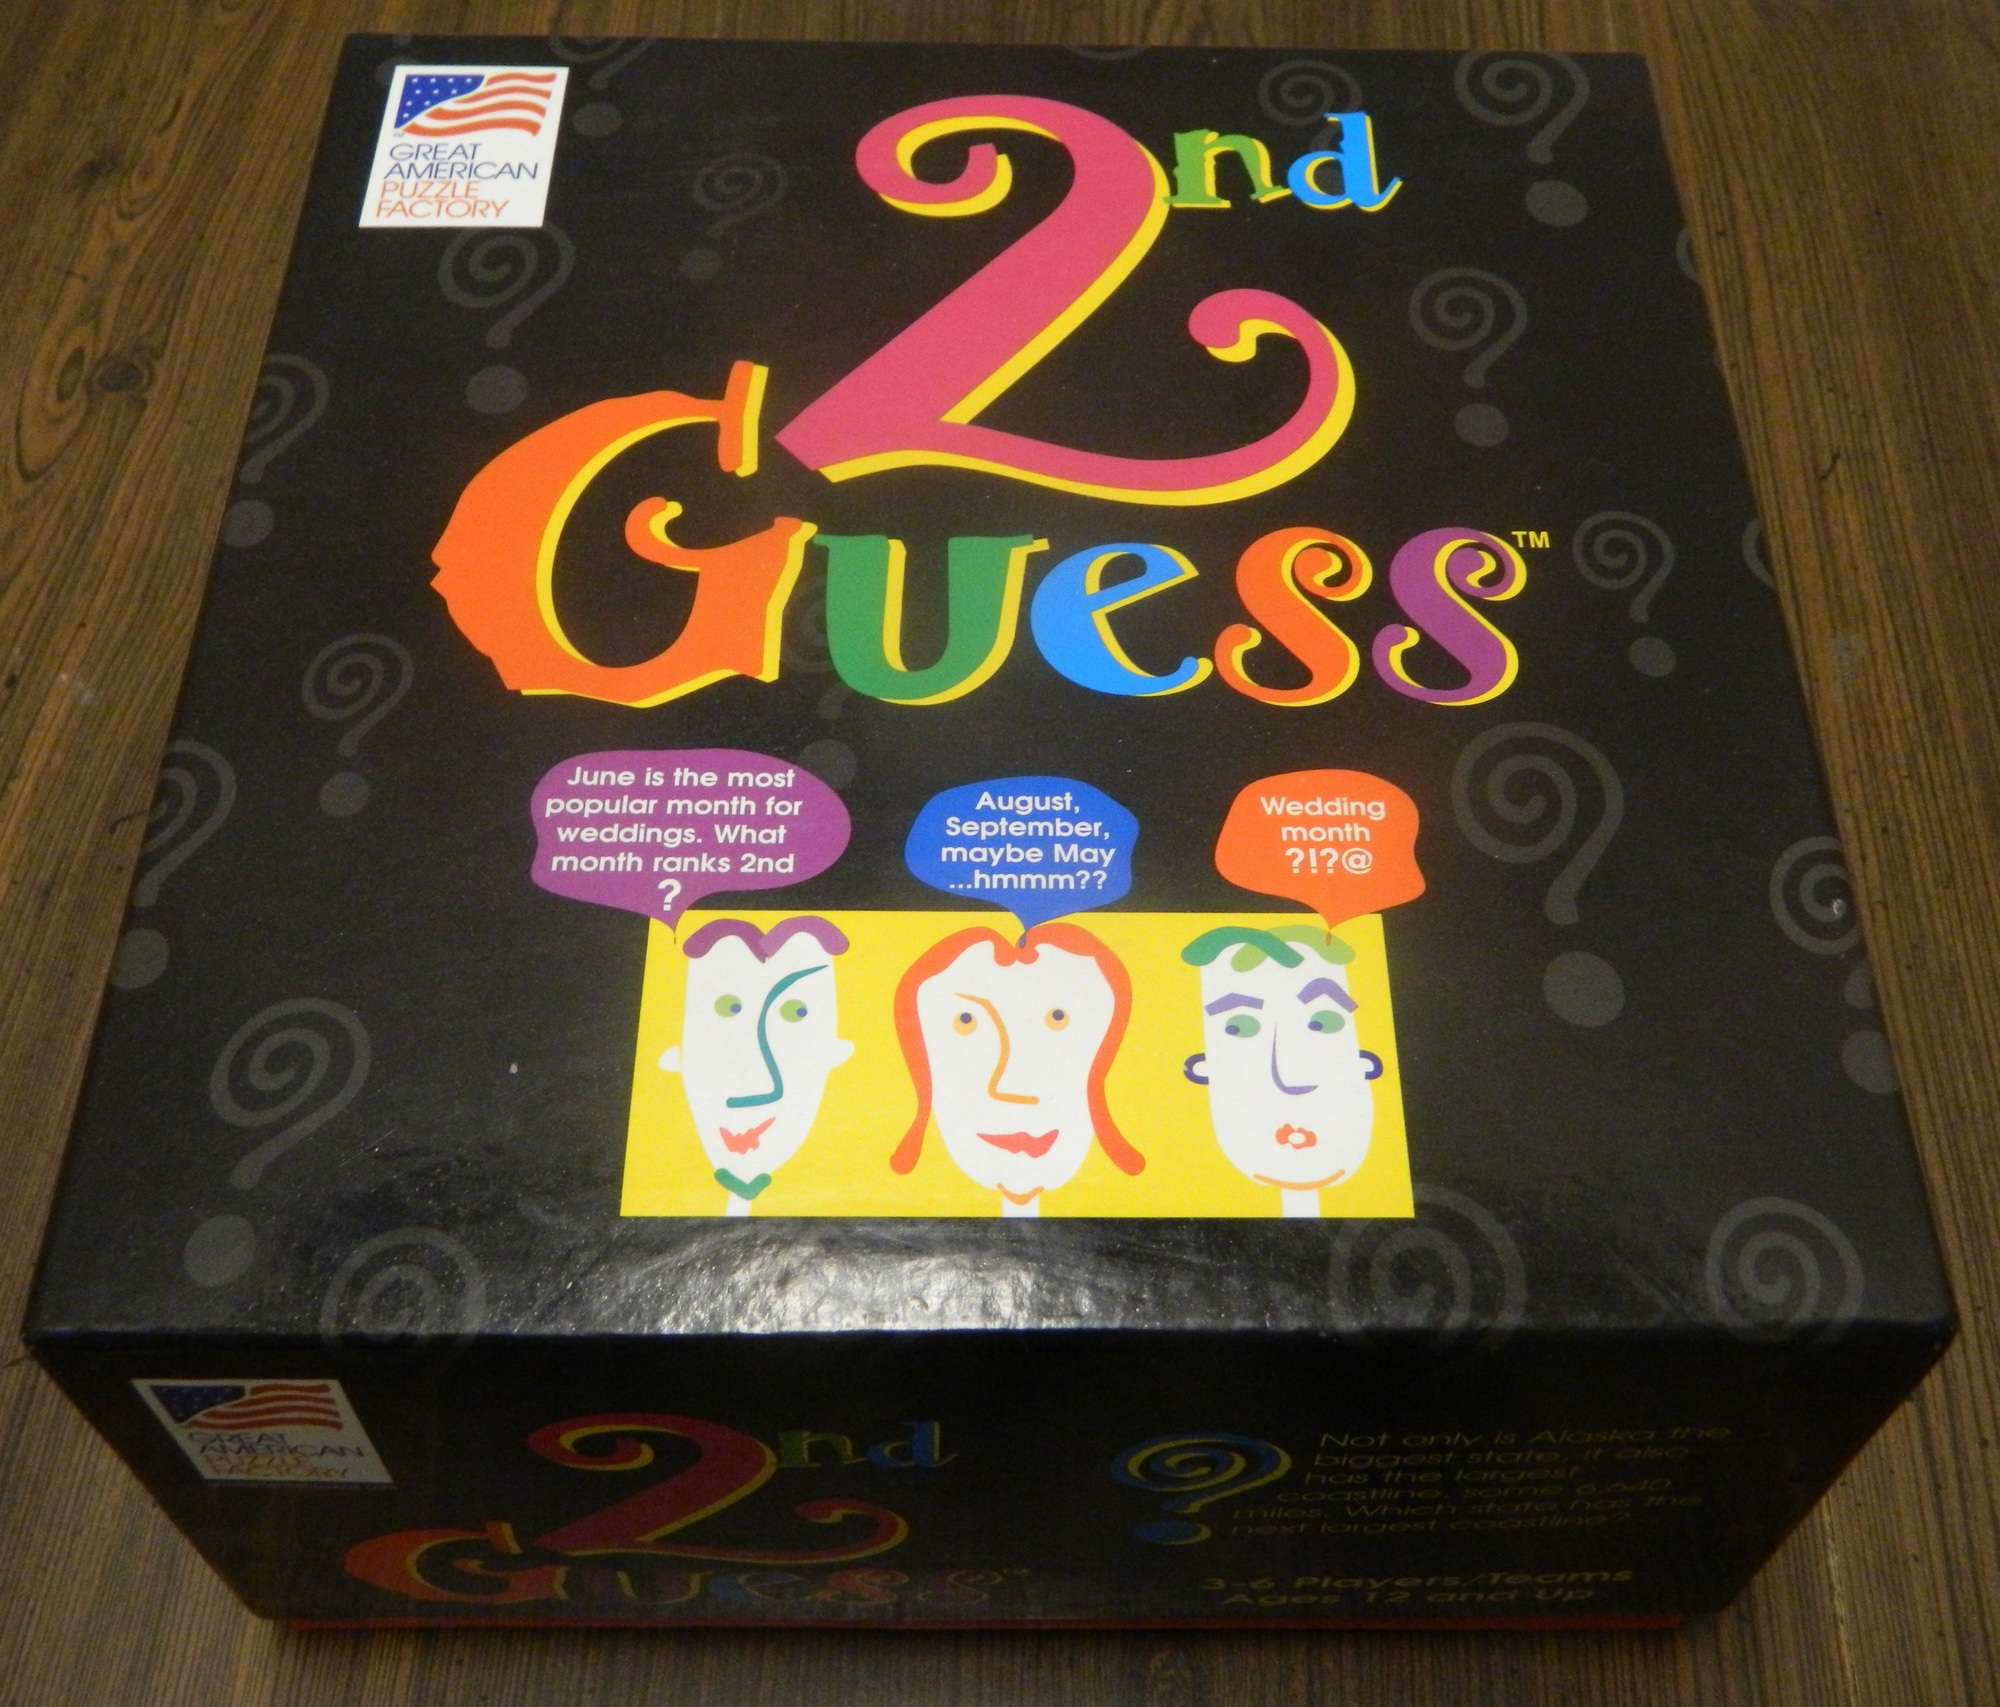 2nd Guess Trivia Game Review and Instructions